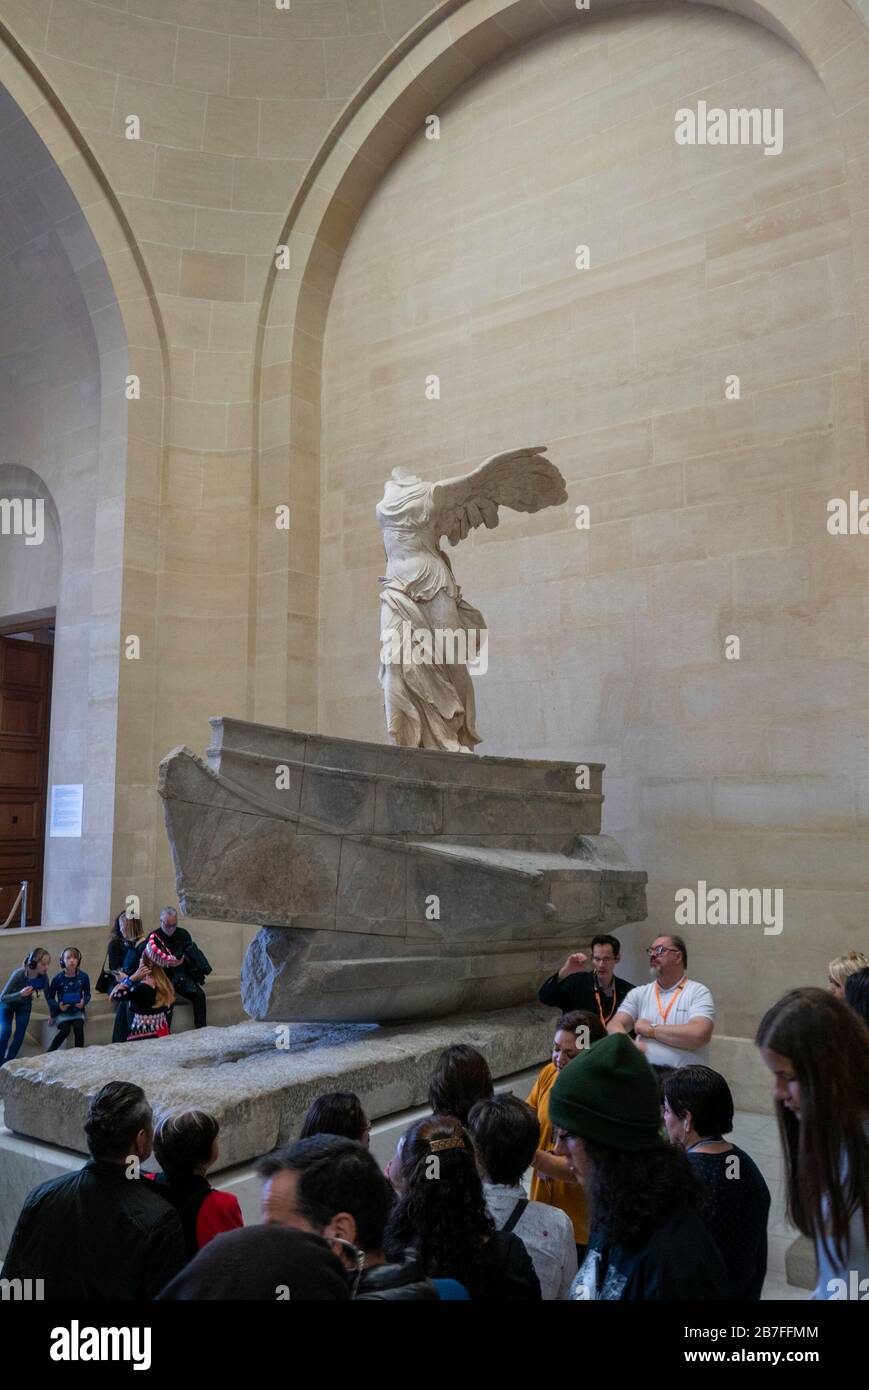 Der Winged Victory of Samothrace Ancient Greece Sculpture im Louvre Museum in Paris, Frankreich, Europa Stockfoto